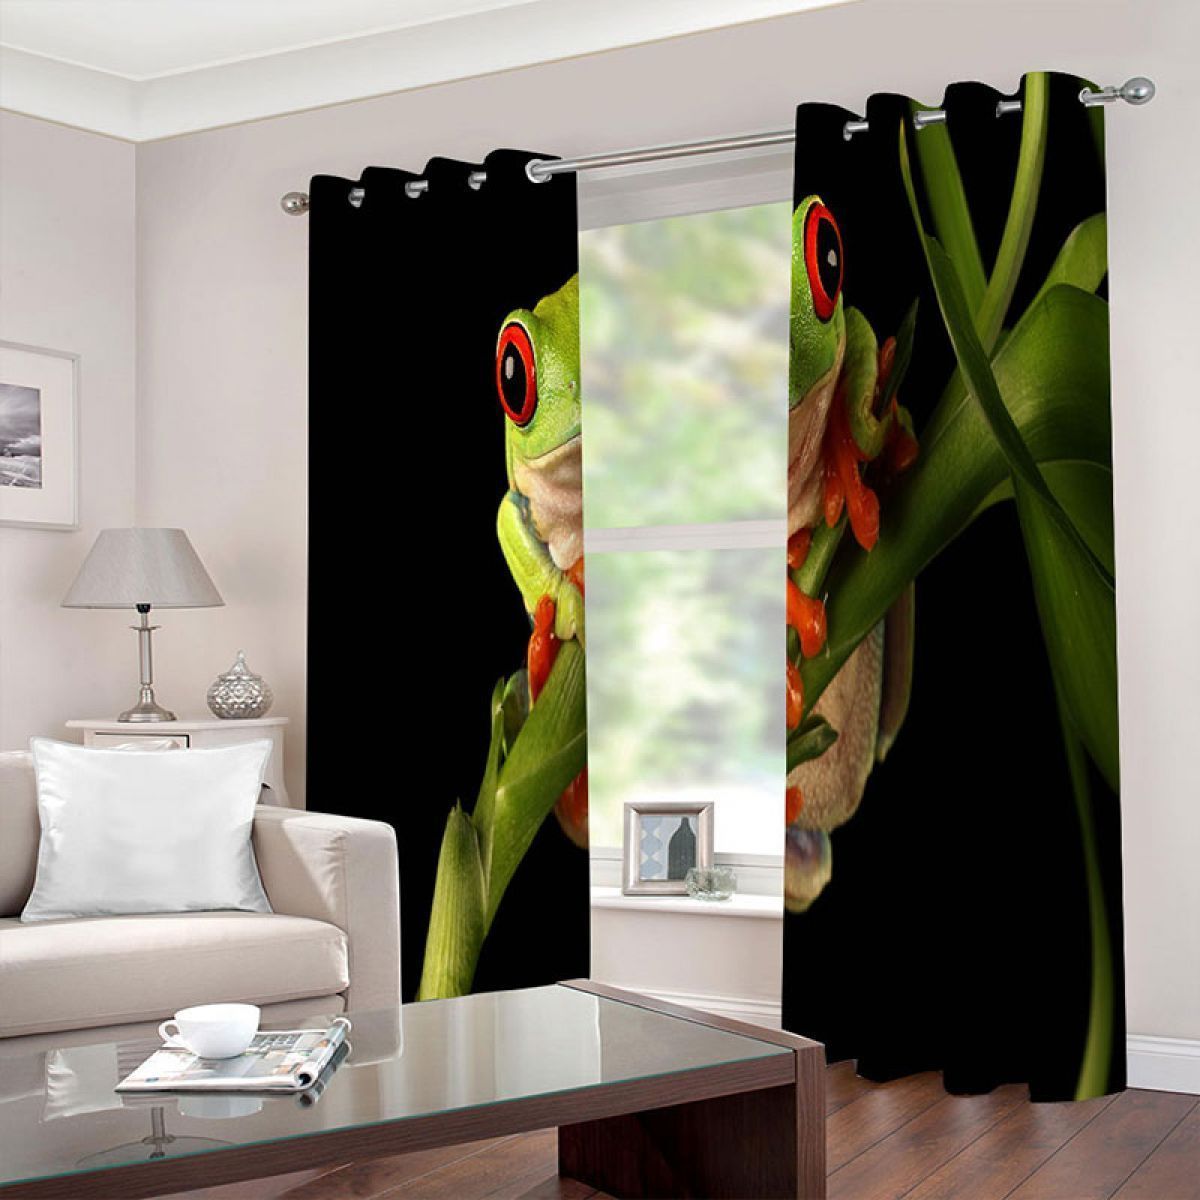 Green Frog On Leaf Printed Window Curtain Home Decor